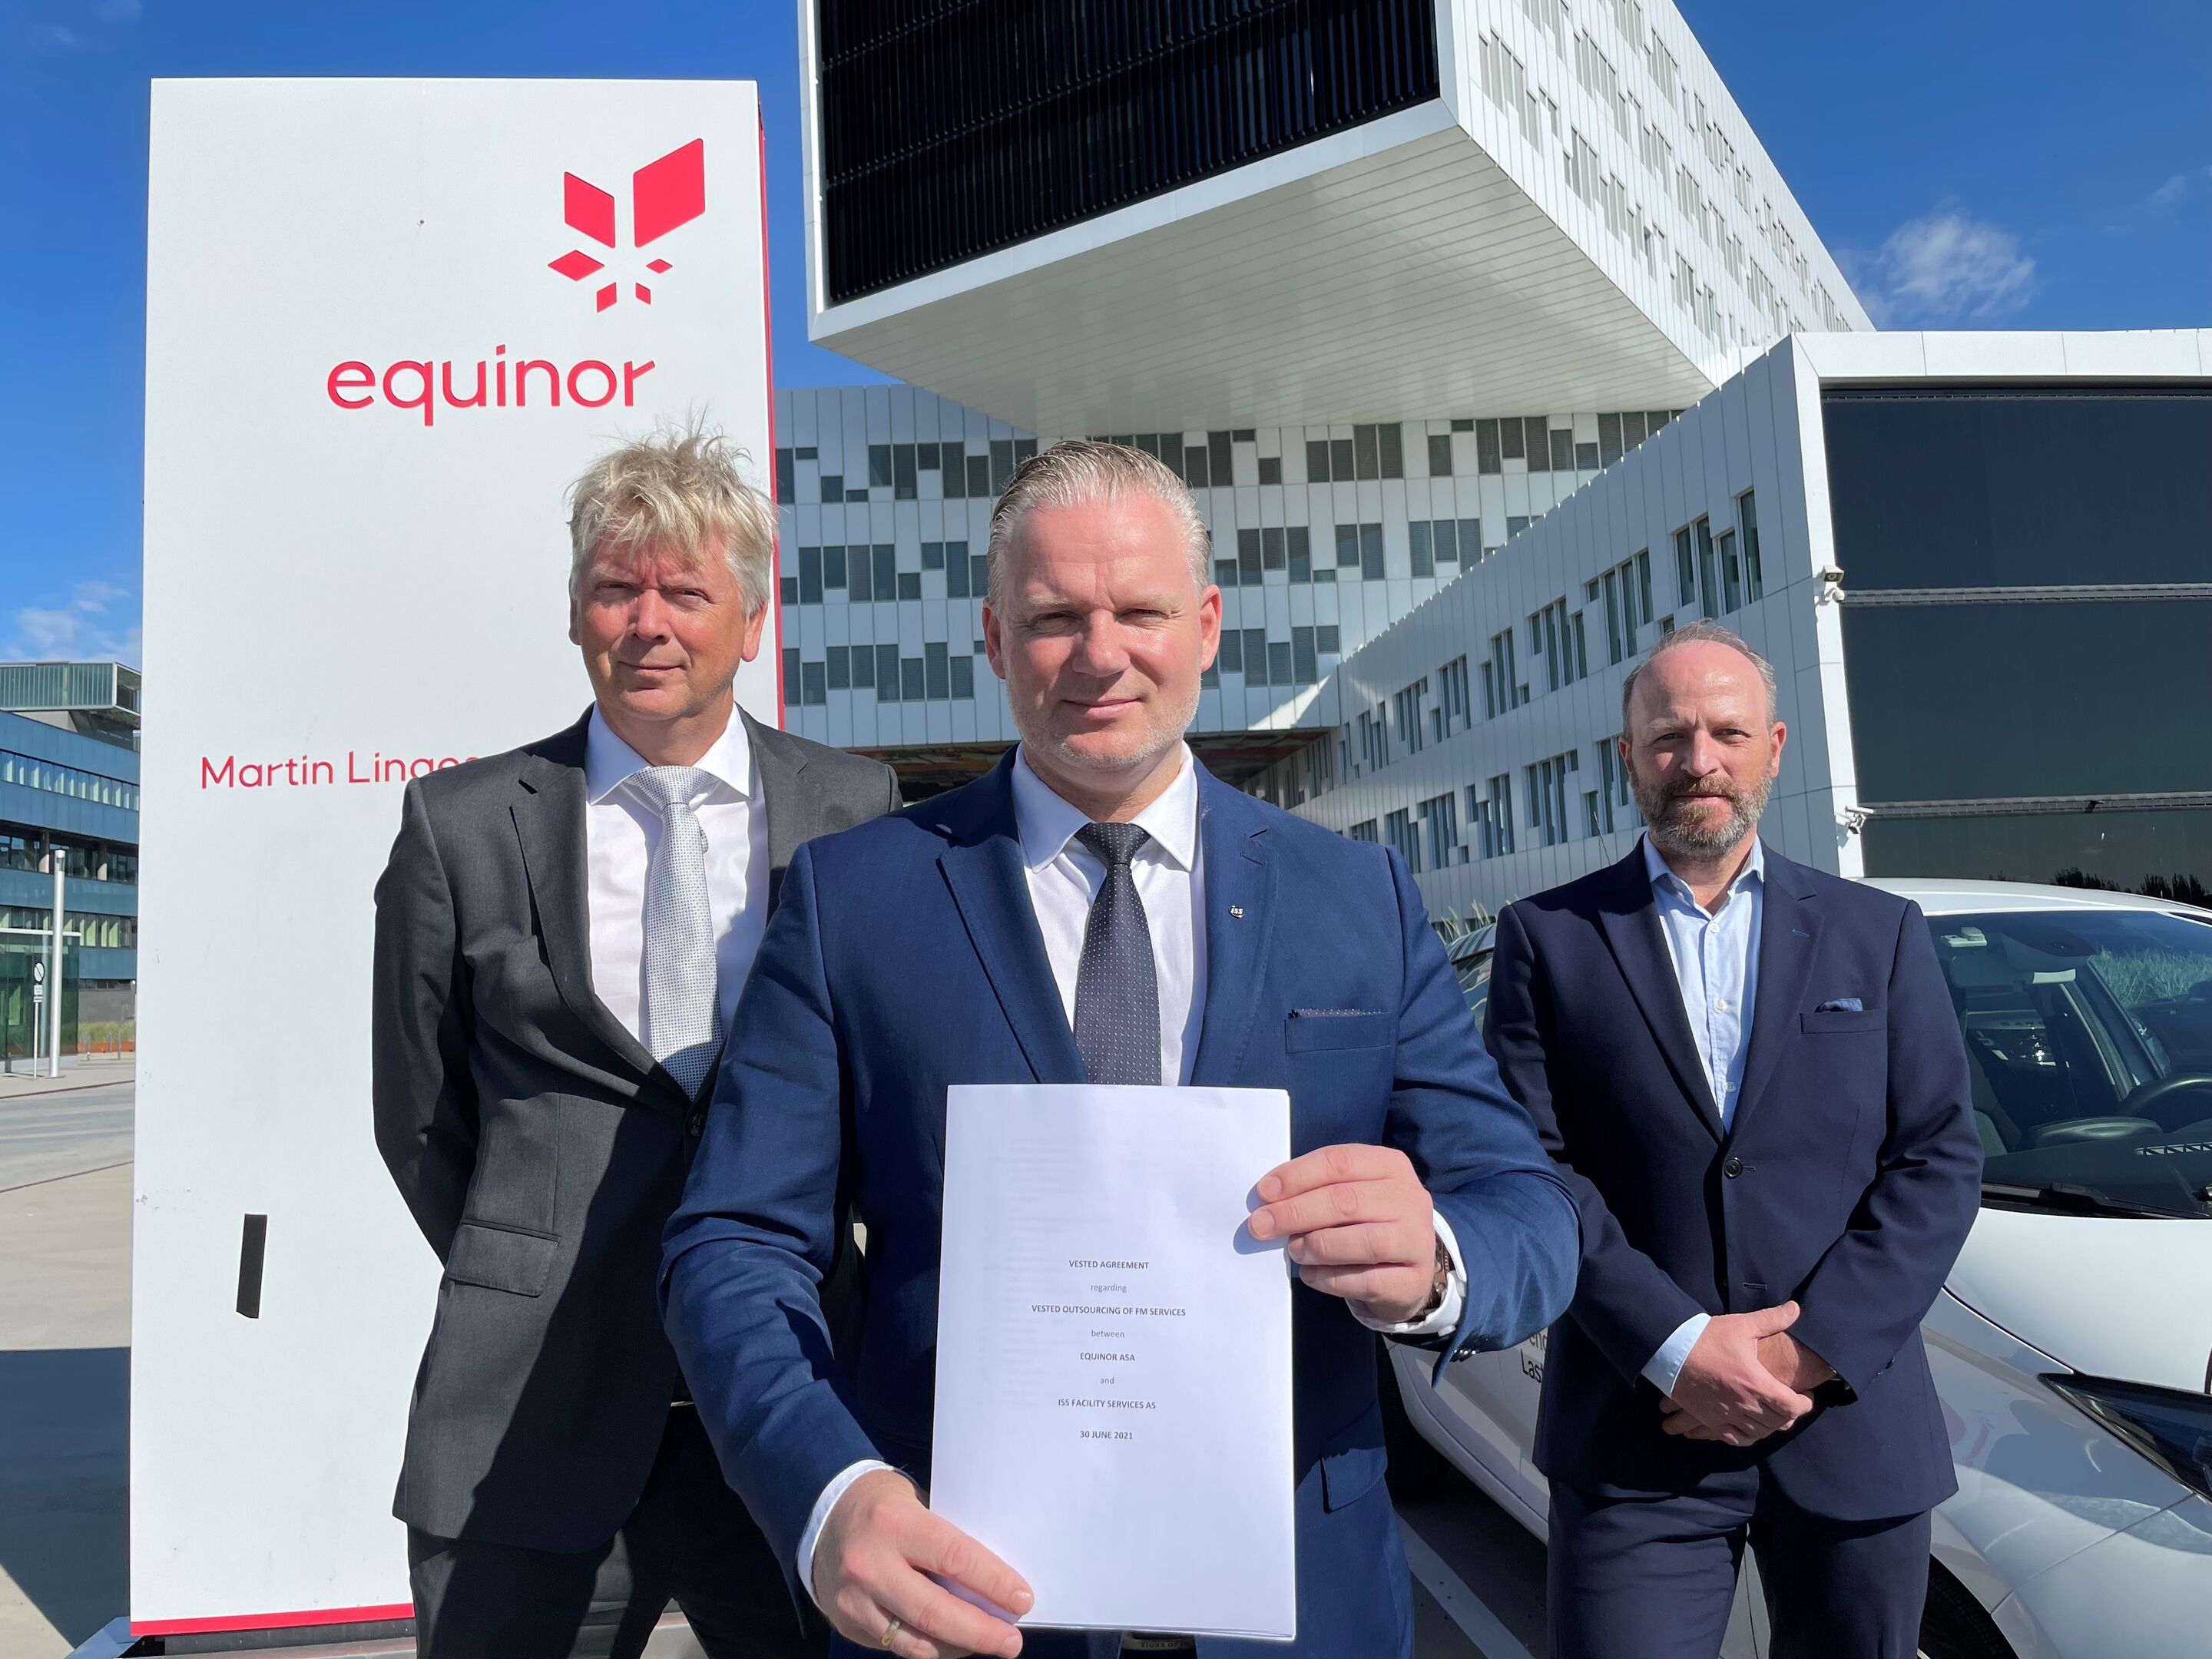 The ISS/Equinor contract is the largest FM contract in Norway, and the largest Vested contract in the Nordics